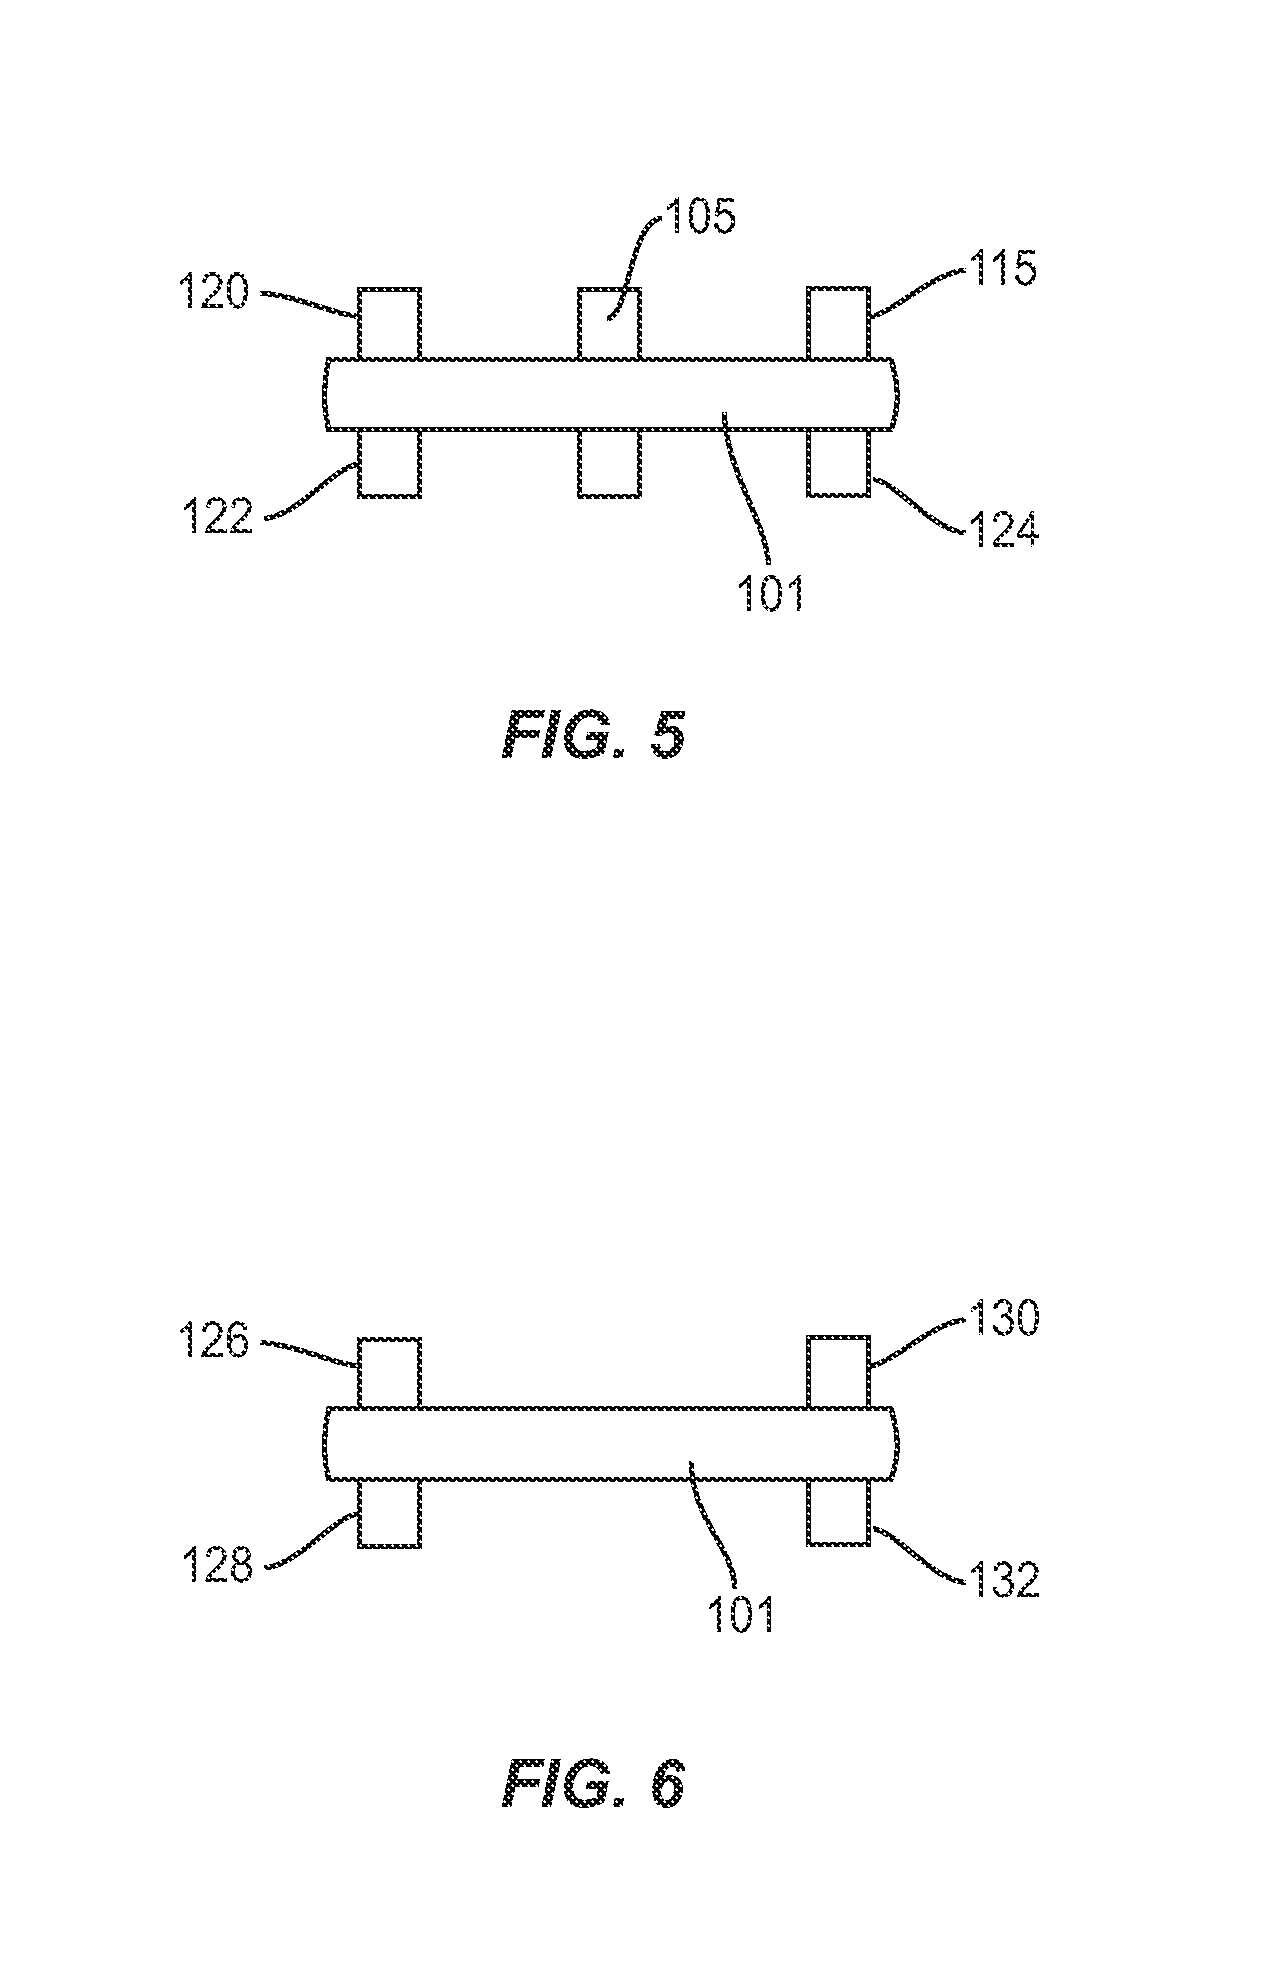 Facet joint implant device